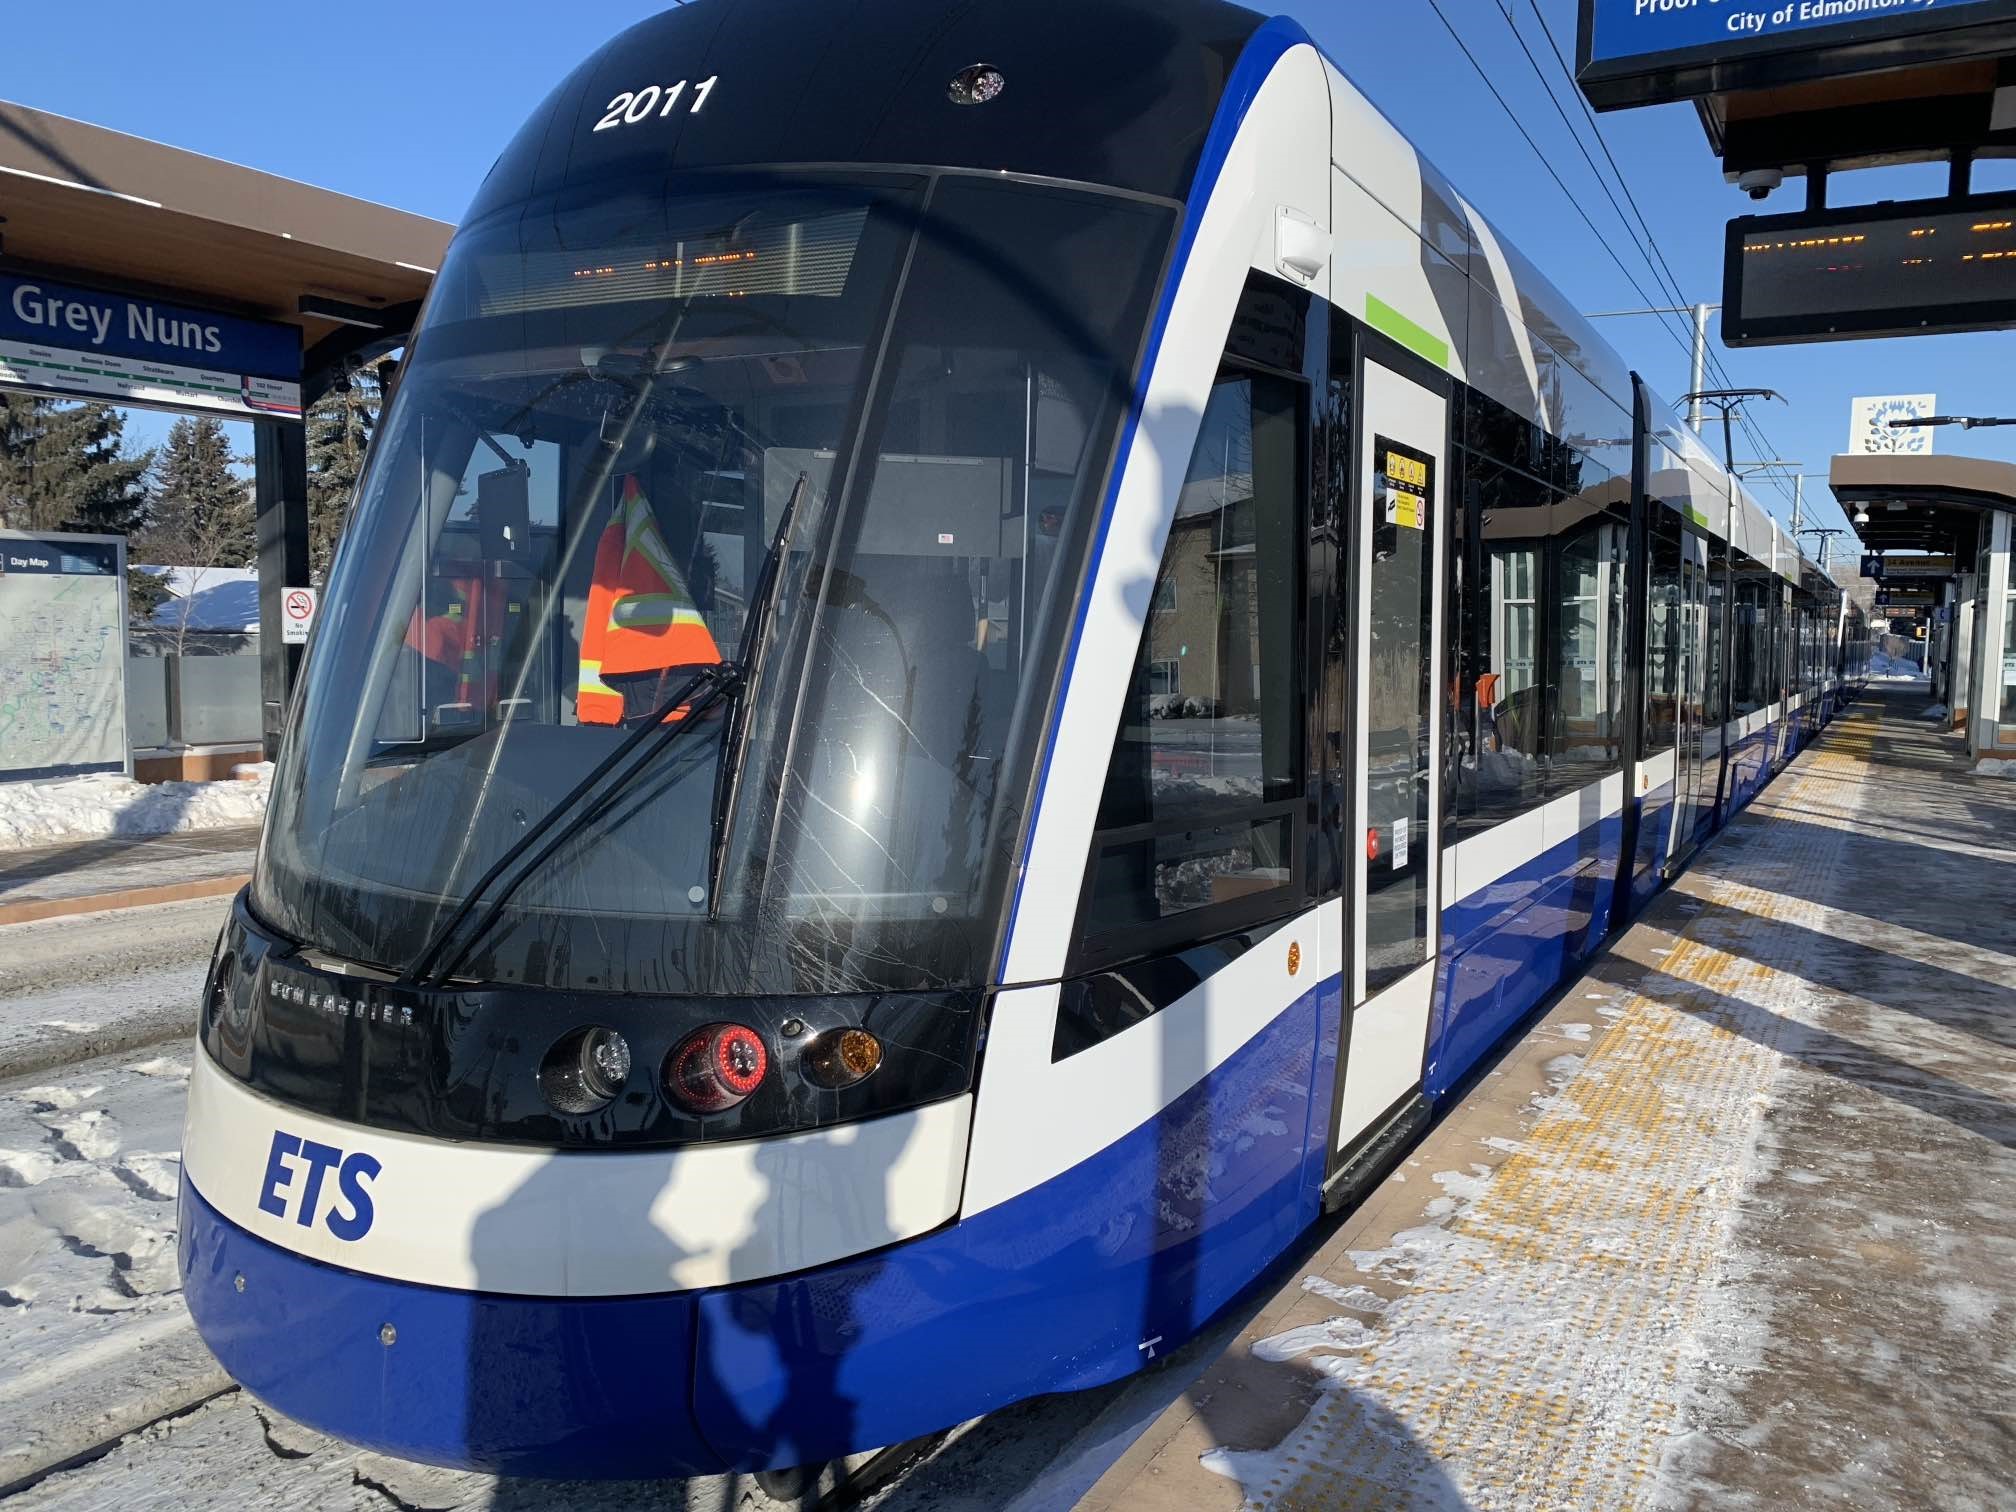 Planned track repairs to disrupt service at 2 LRT stations in Edmonton next week